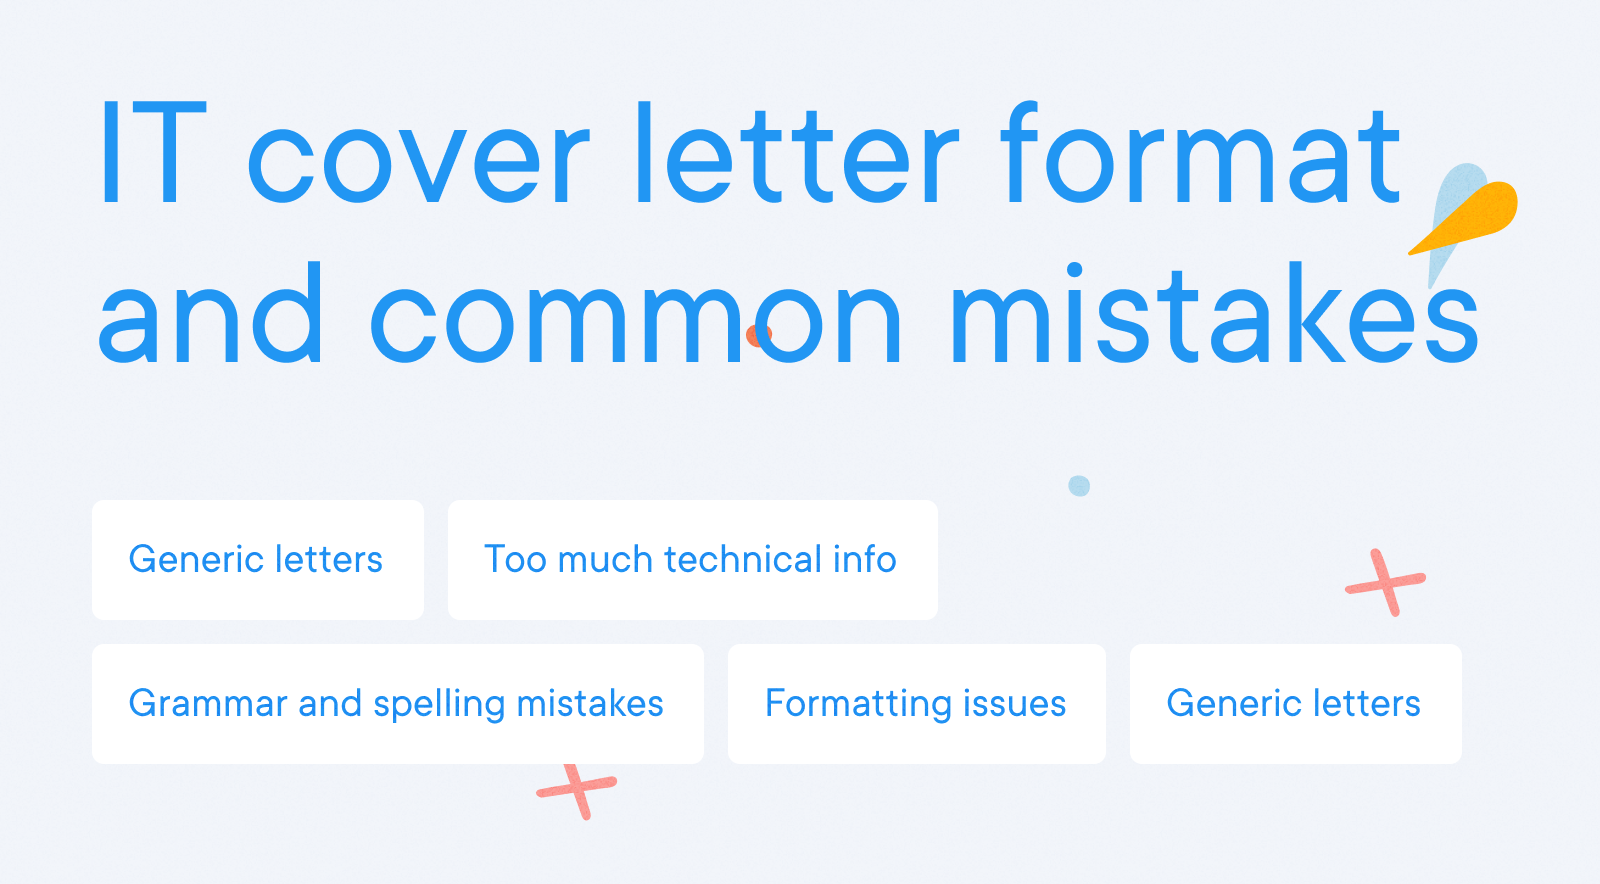 IT - IT cover letter format and common mistakes